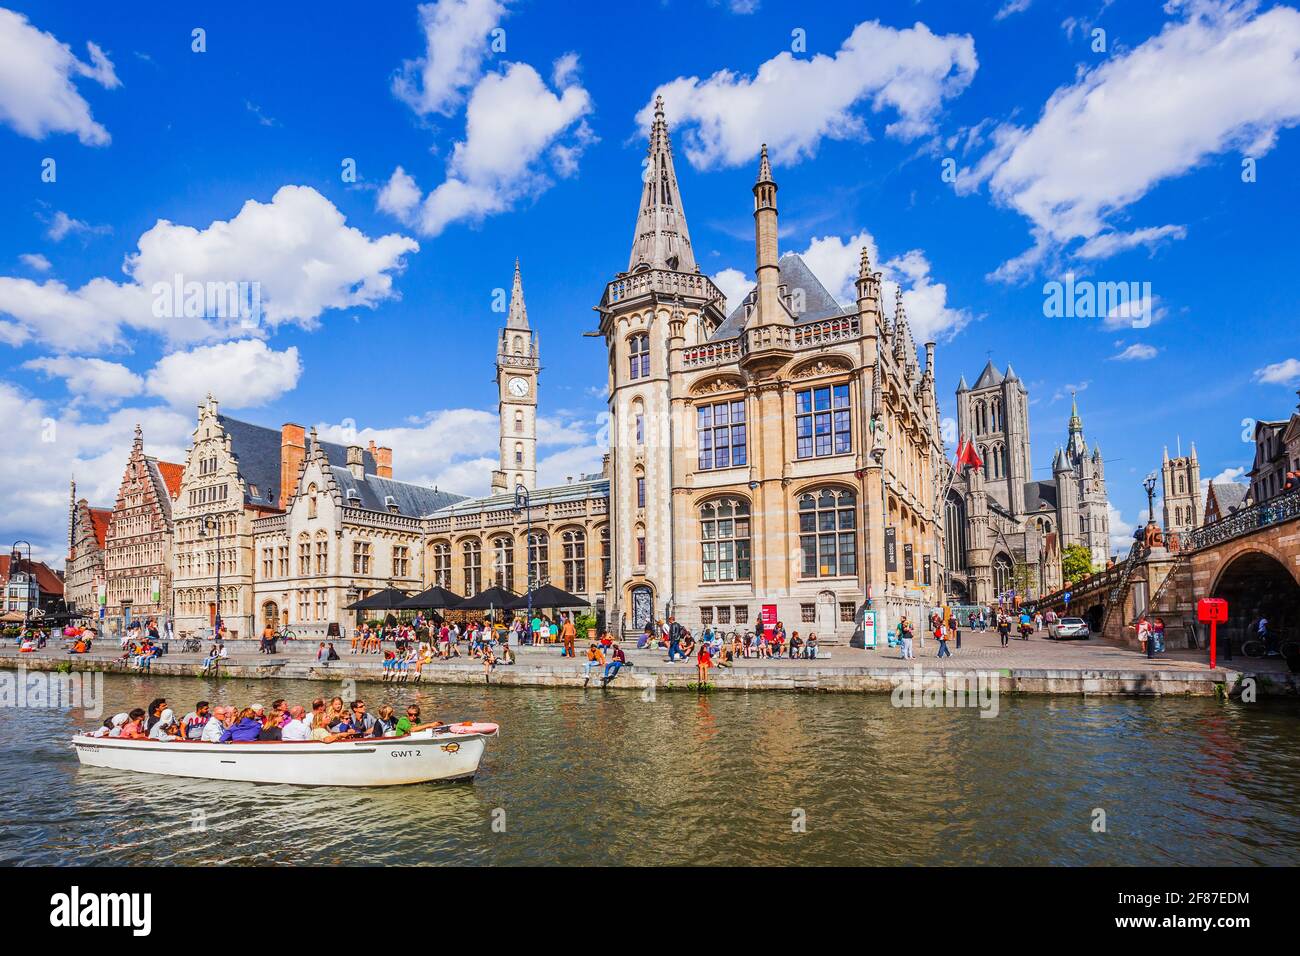 Ghent (Gent), Belgium - August 10, 2018: Graslei quay and Leie river. Stock Photo